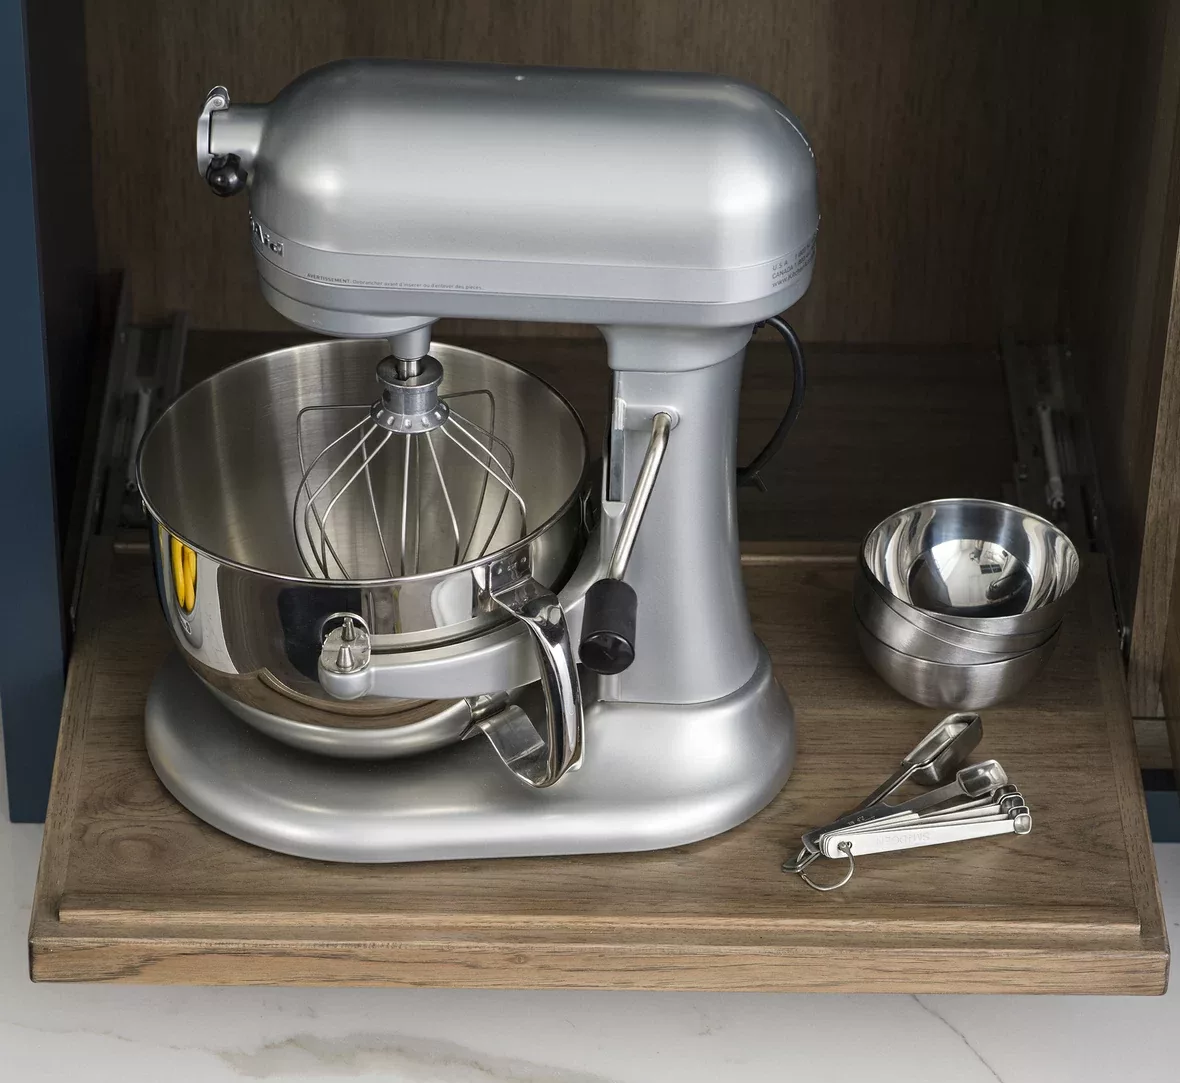 Alternative storage solutions to store your mixer in your kitchen.